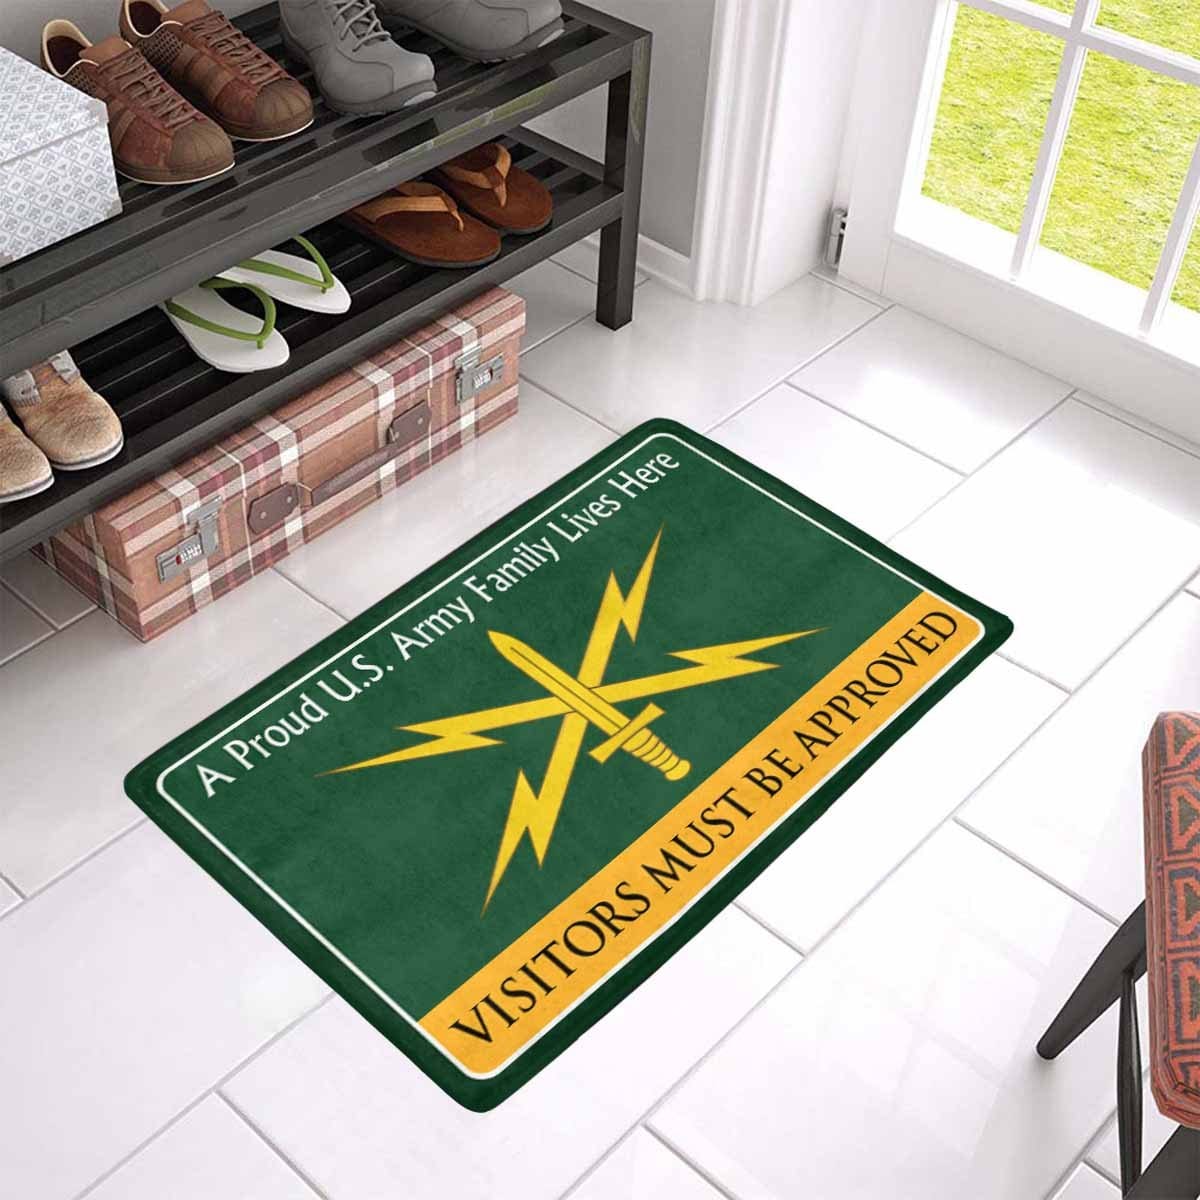 U.S. Army Cyber Corps Family Doormat - Visitors must be approved Doormat (23.6 inches x 15.7 inches)-Doormat-Army-Branch-Veterans Nation